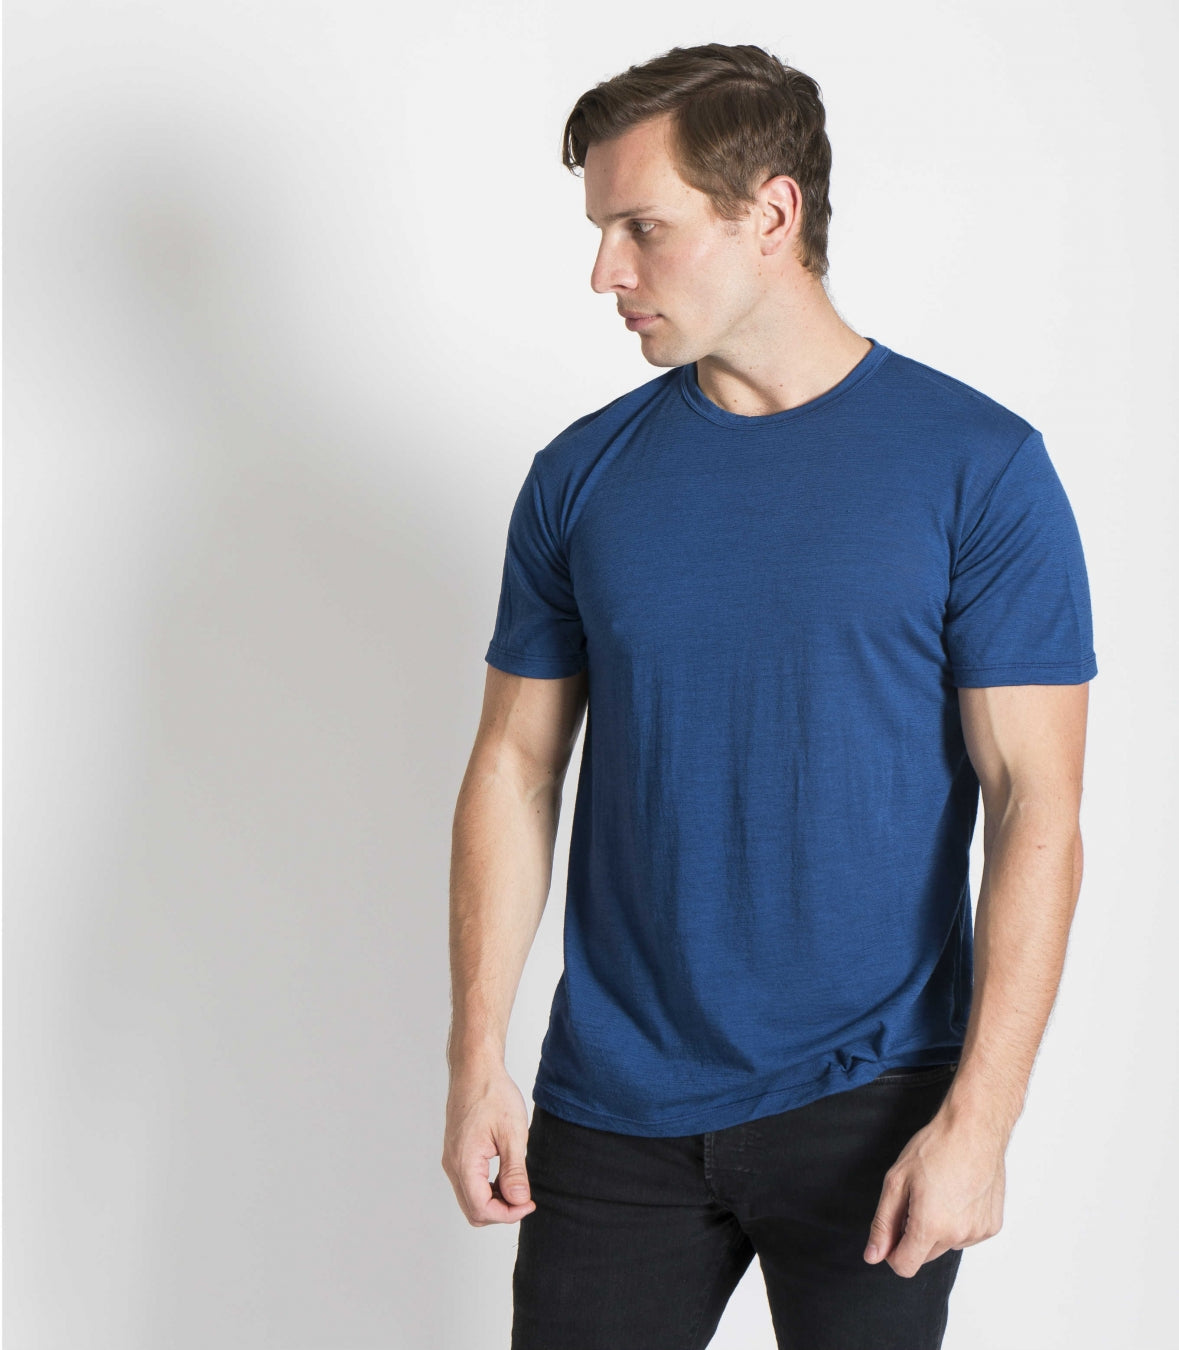 Wool Crew Neck SS - Additional Colors Made in USA | RAMBLERS WAY